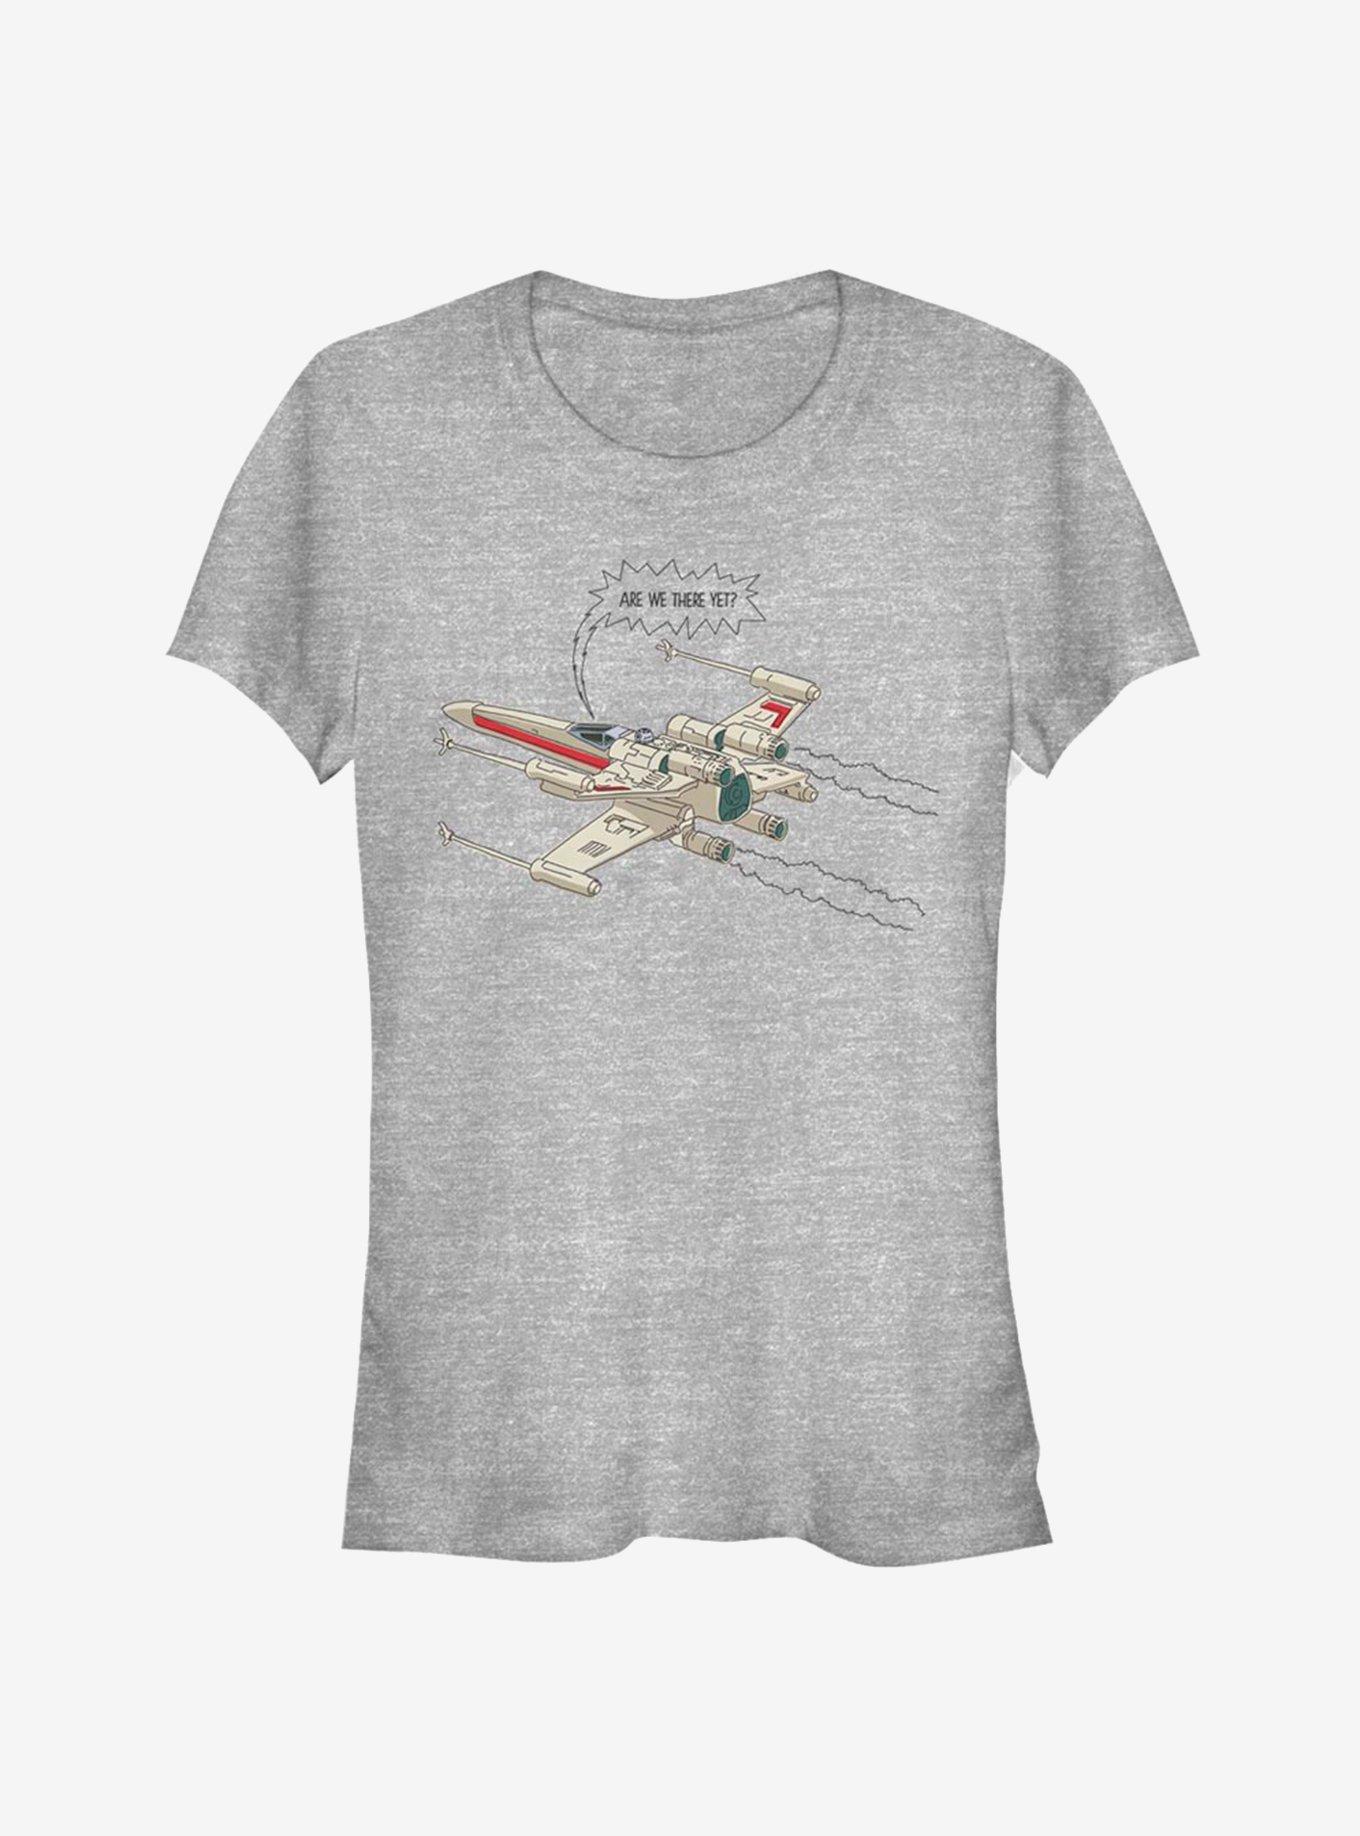 Star Wars Are We There Yet? Girls T-Shirt